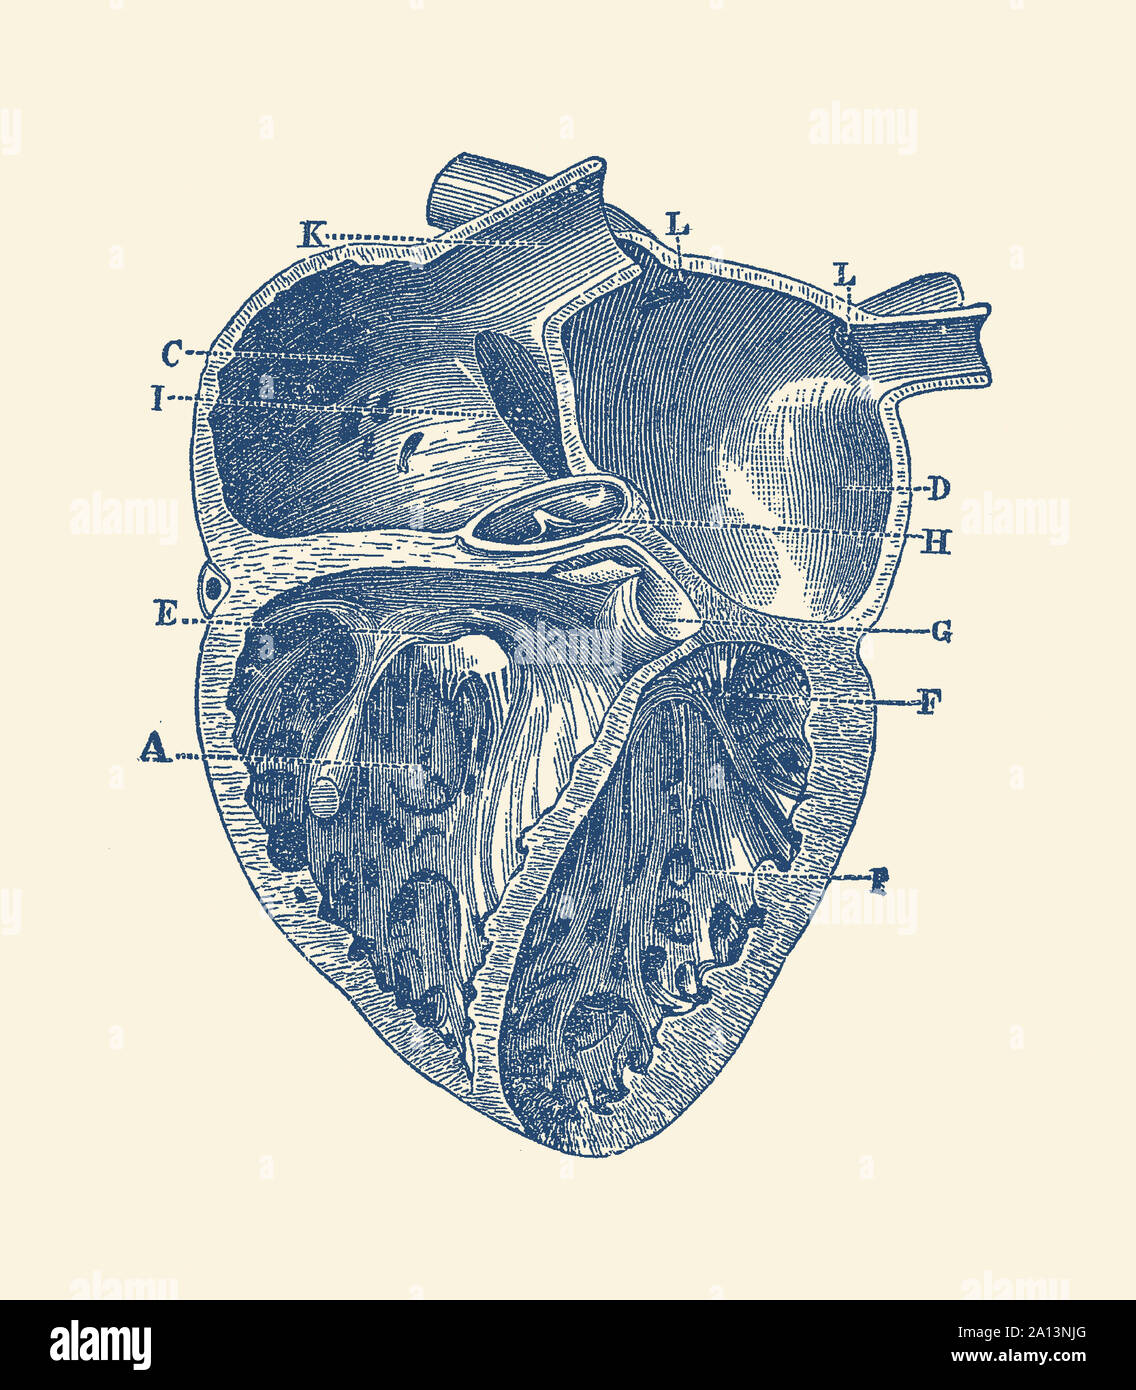 Vintage anatomy print showing a depiction of the inner heart of a human. Stock Photo